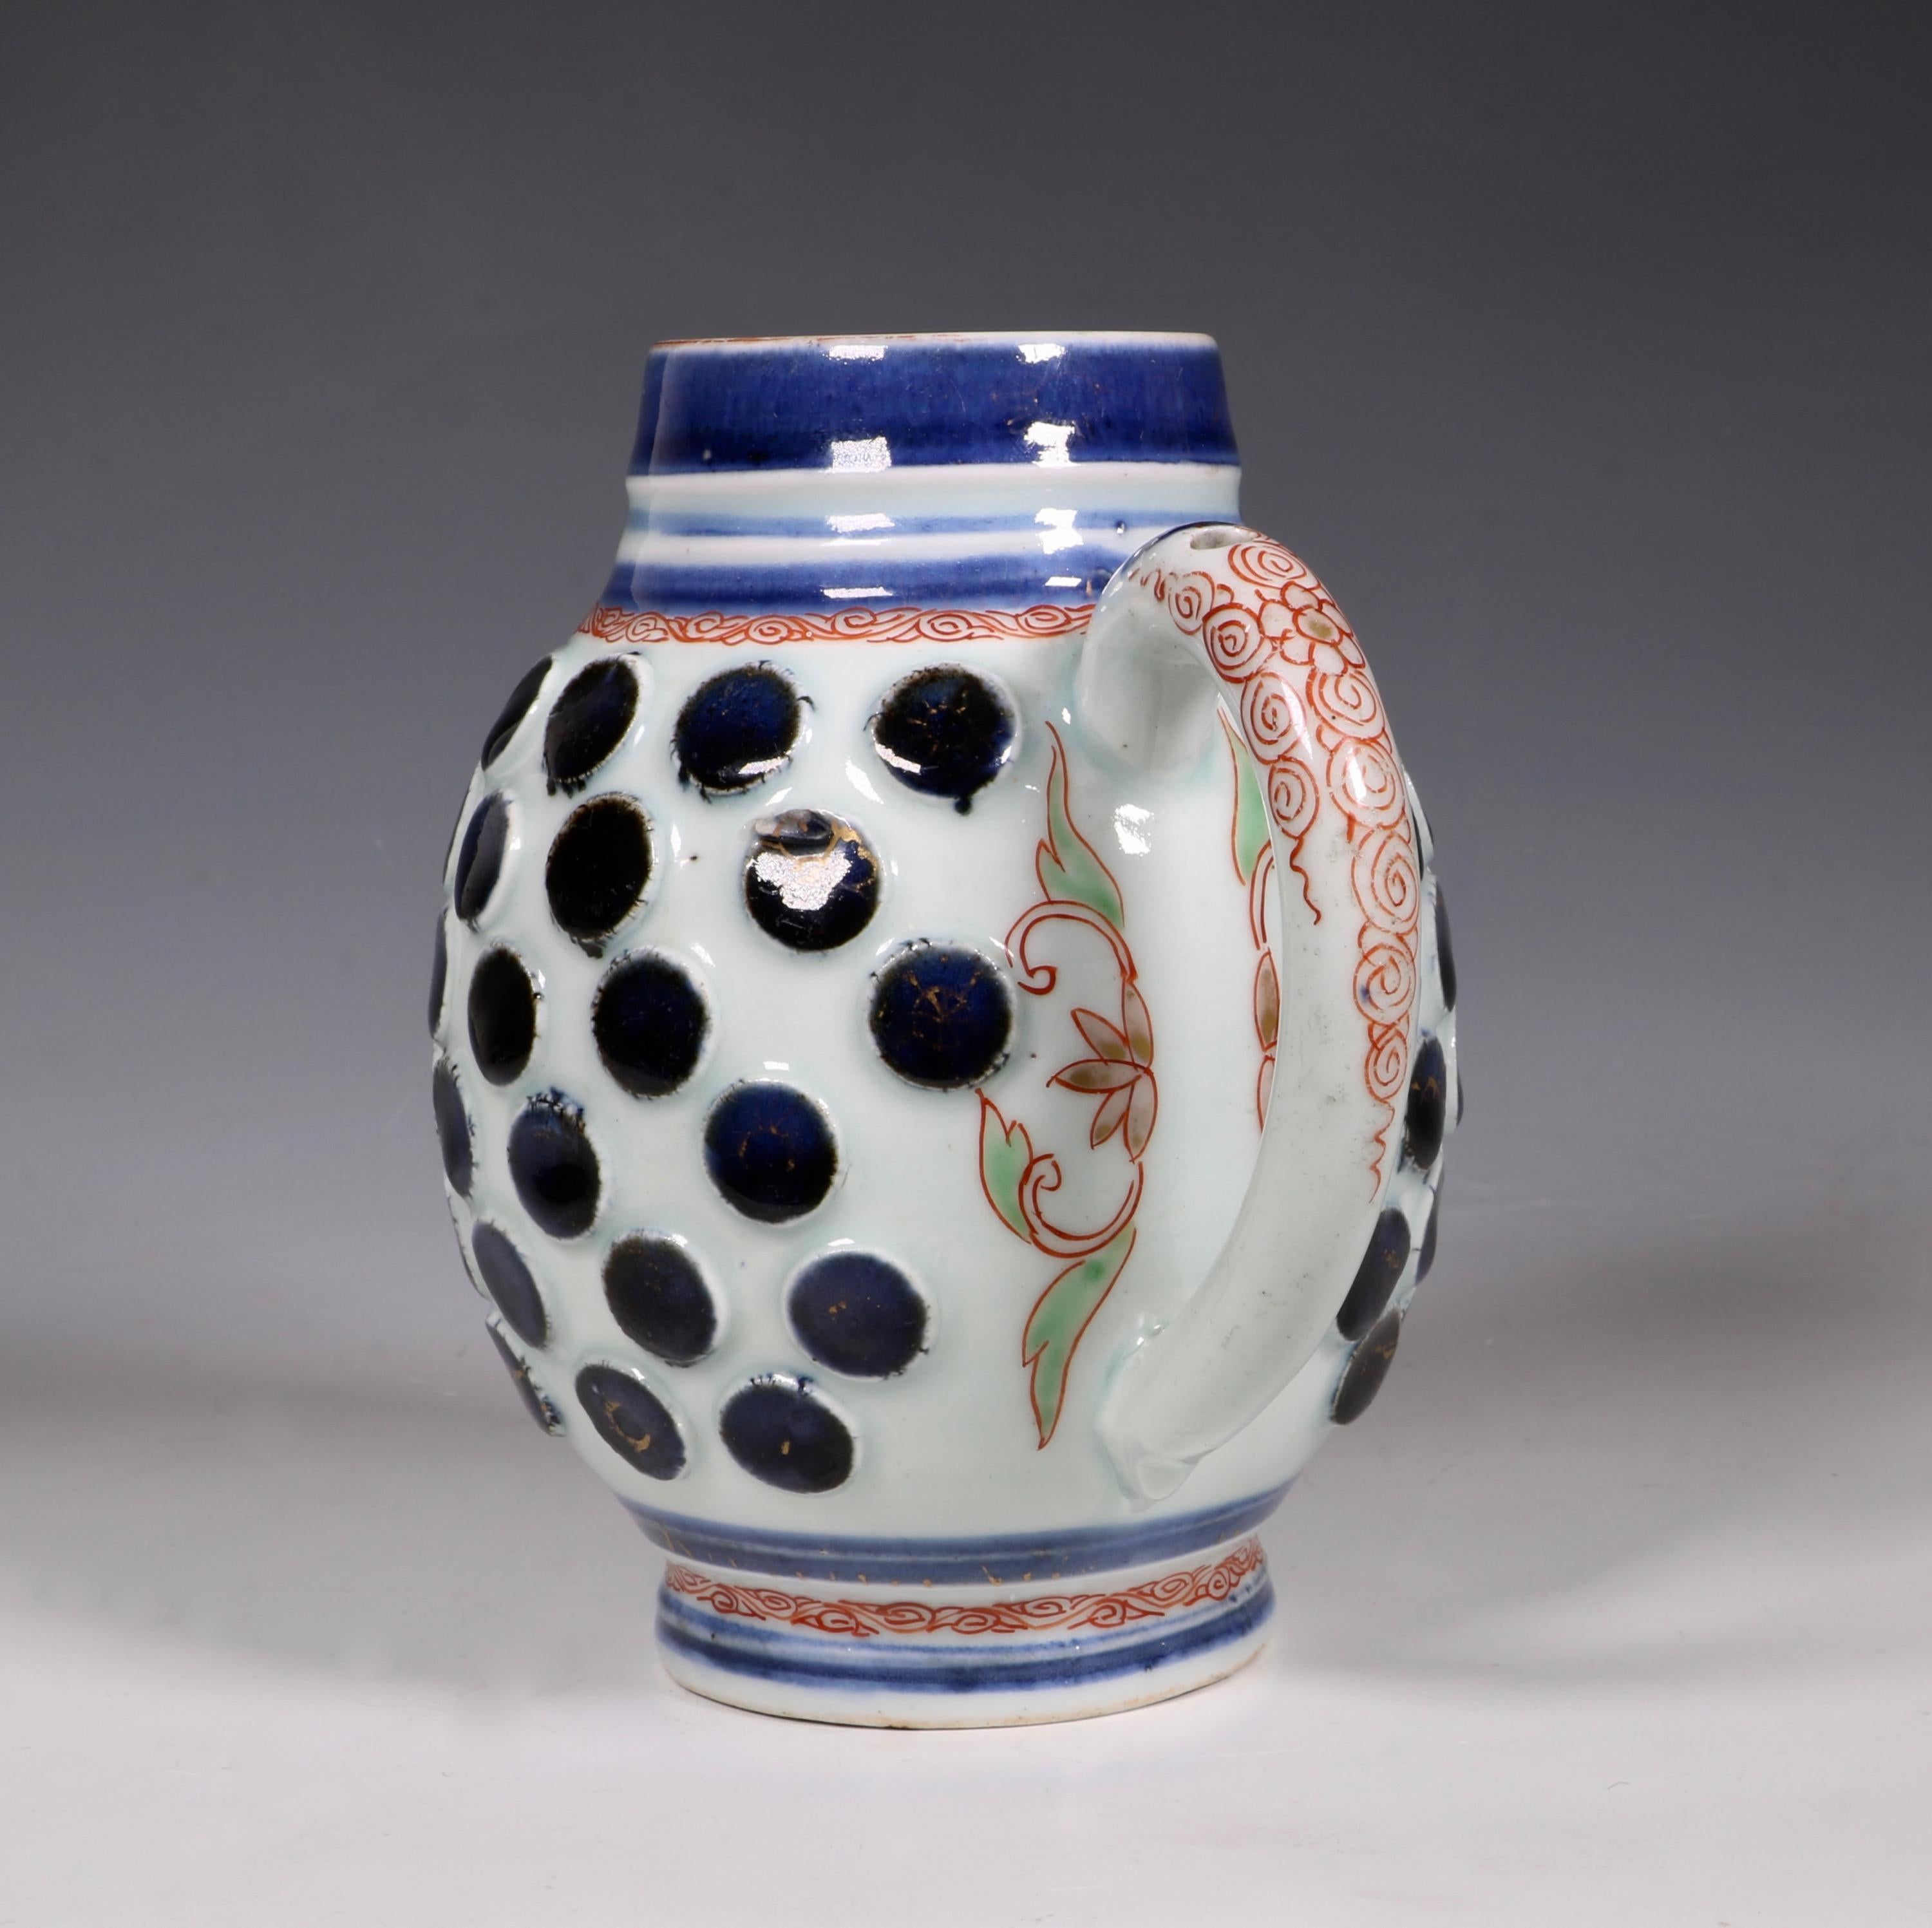 A rare Japanese Arita Tankard. After a German stoneware, probably Westerwald late 17th century original. The rounded body applied with round bosses painted blue.

The ribbed neck with blue bands. Traces of gilt. Japanese Arita, circa